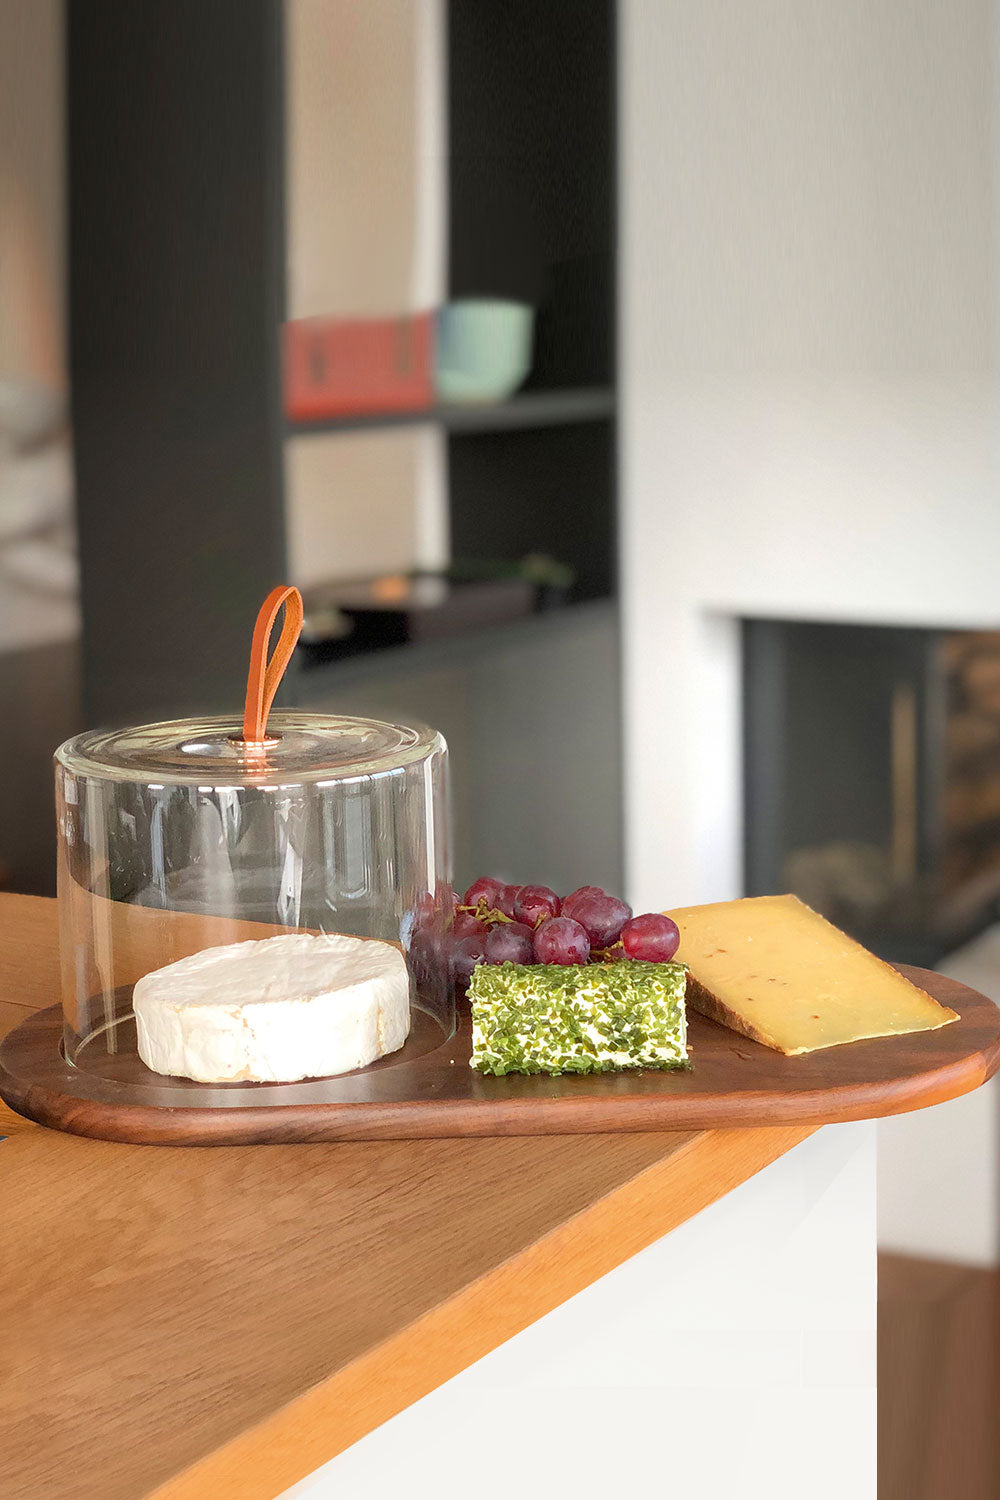 Walnut Cheese Board With Glass Cover